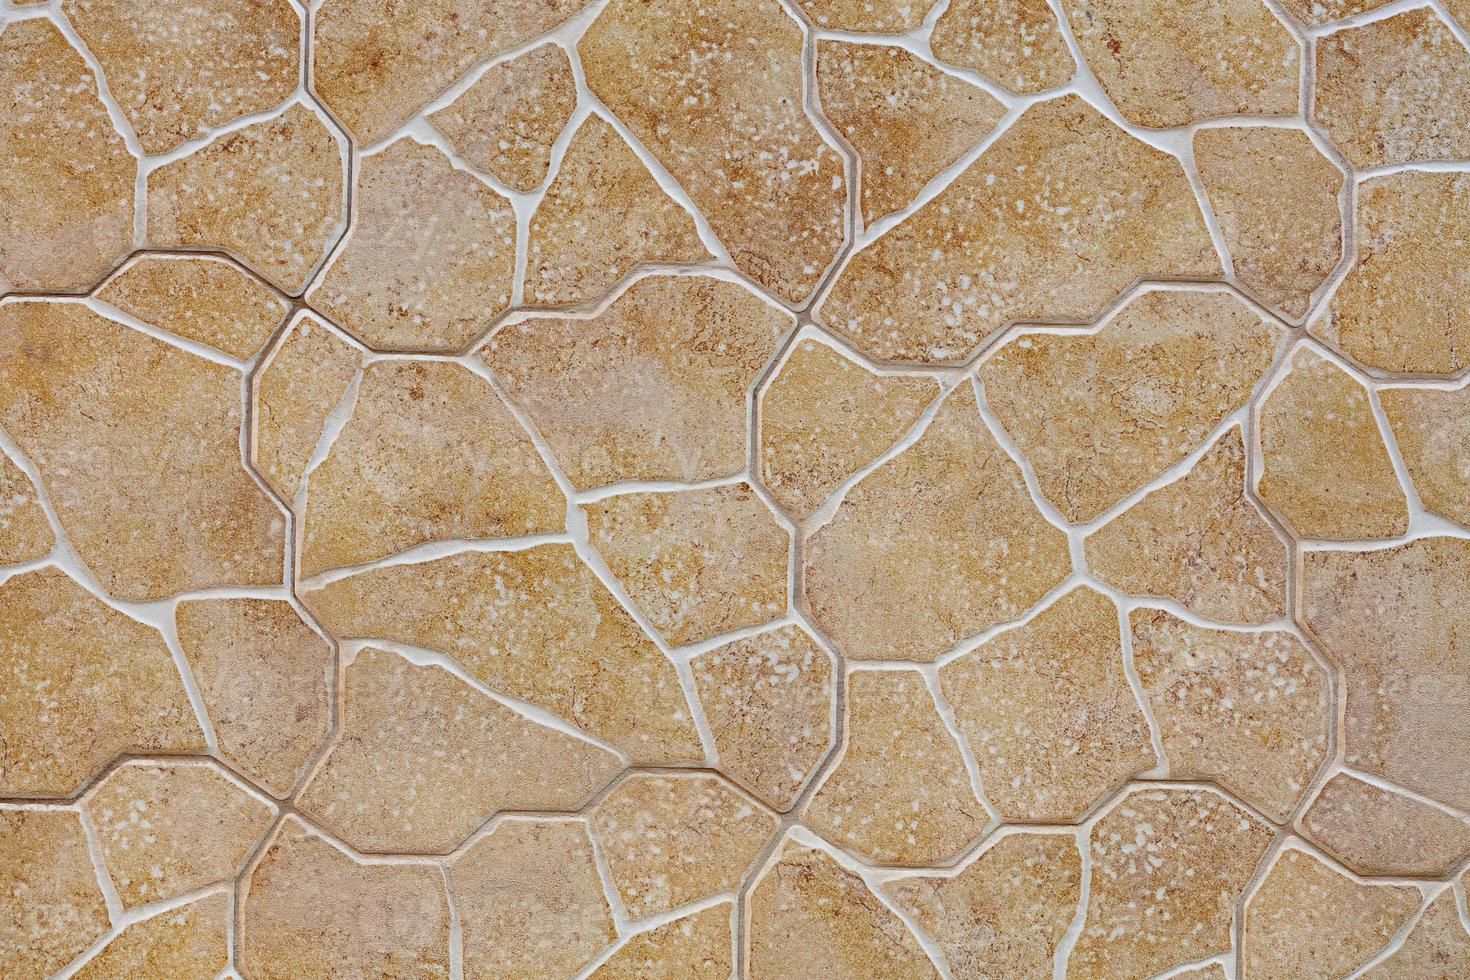 Limestone stone wall texture and background, beige golden limestone building tiles. photo